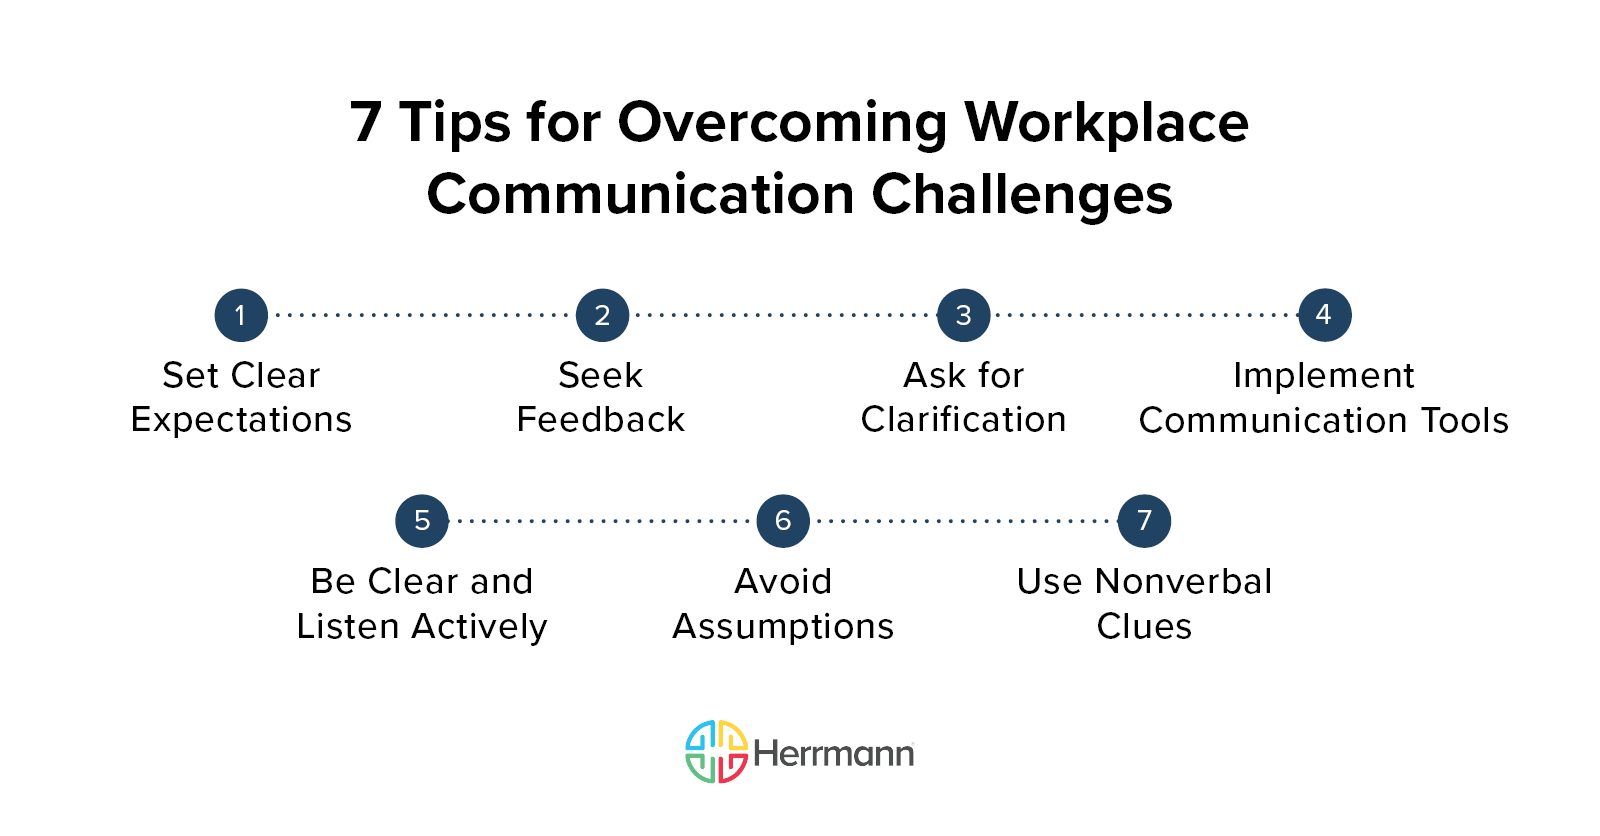 7 Tips for Overcoming Workplace Communication Challenges: 1. Set Clear Expectations 2. Seek Feedback 3. Ask for Clarification 4. Implement Communication Tools 5. Be Clear and Listen Actively 6. Avoid Assumptions 7. Use Nonverbal Clues